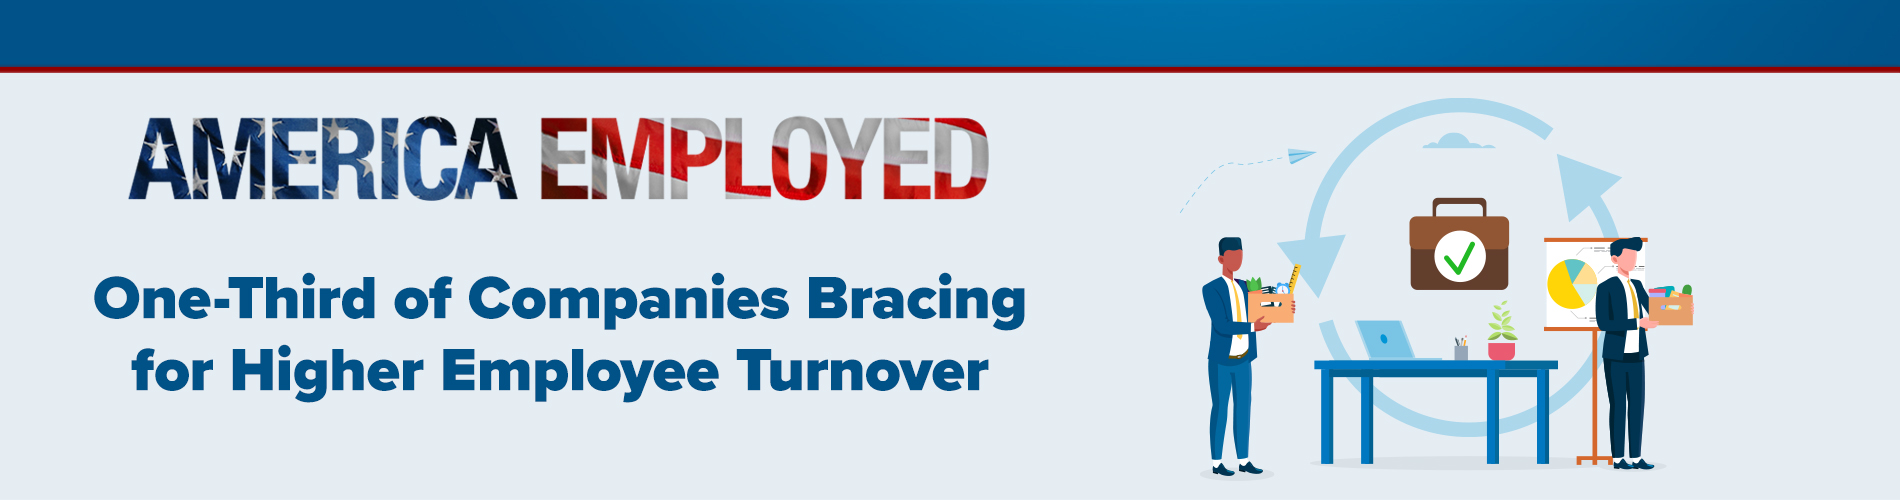 2-28-24 - One-Third of Companies Bracing for Higher Employee Turnover - America Employed